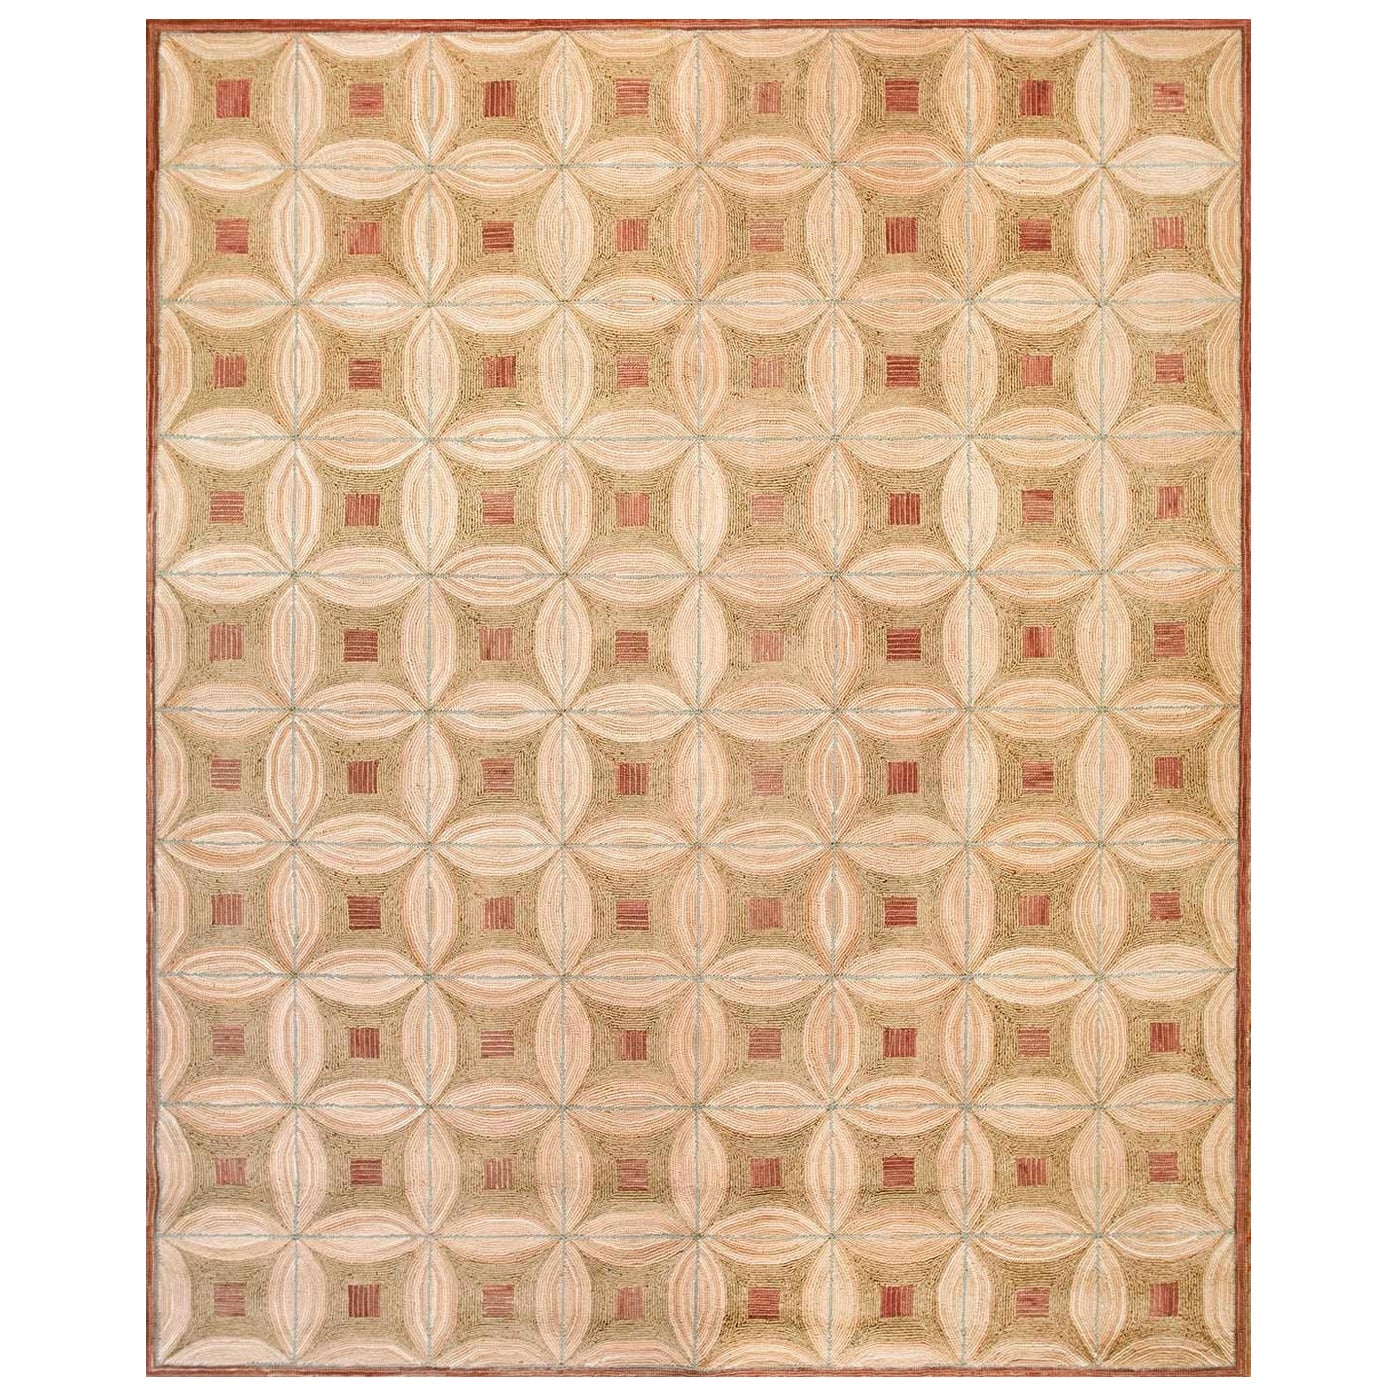 Contemporary Cotton Hooked Rug with Jute Highlights ( 8' x 10" - 245 x 305 ) For Sale